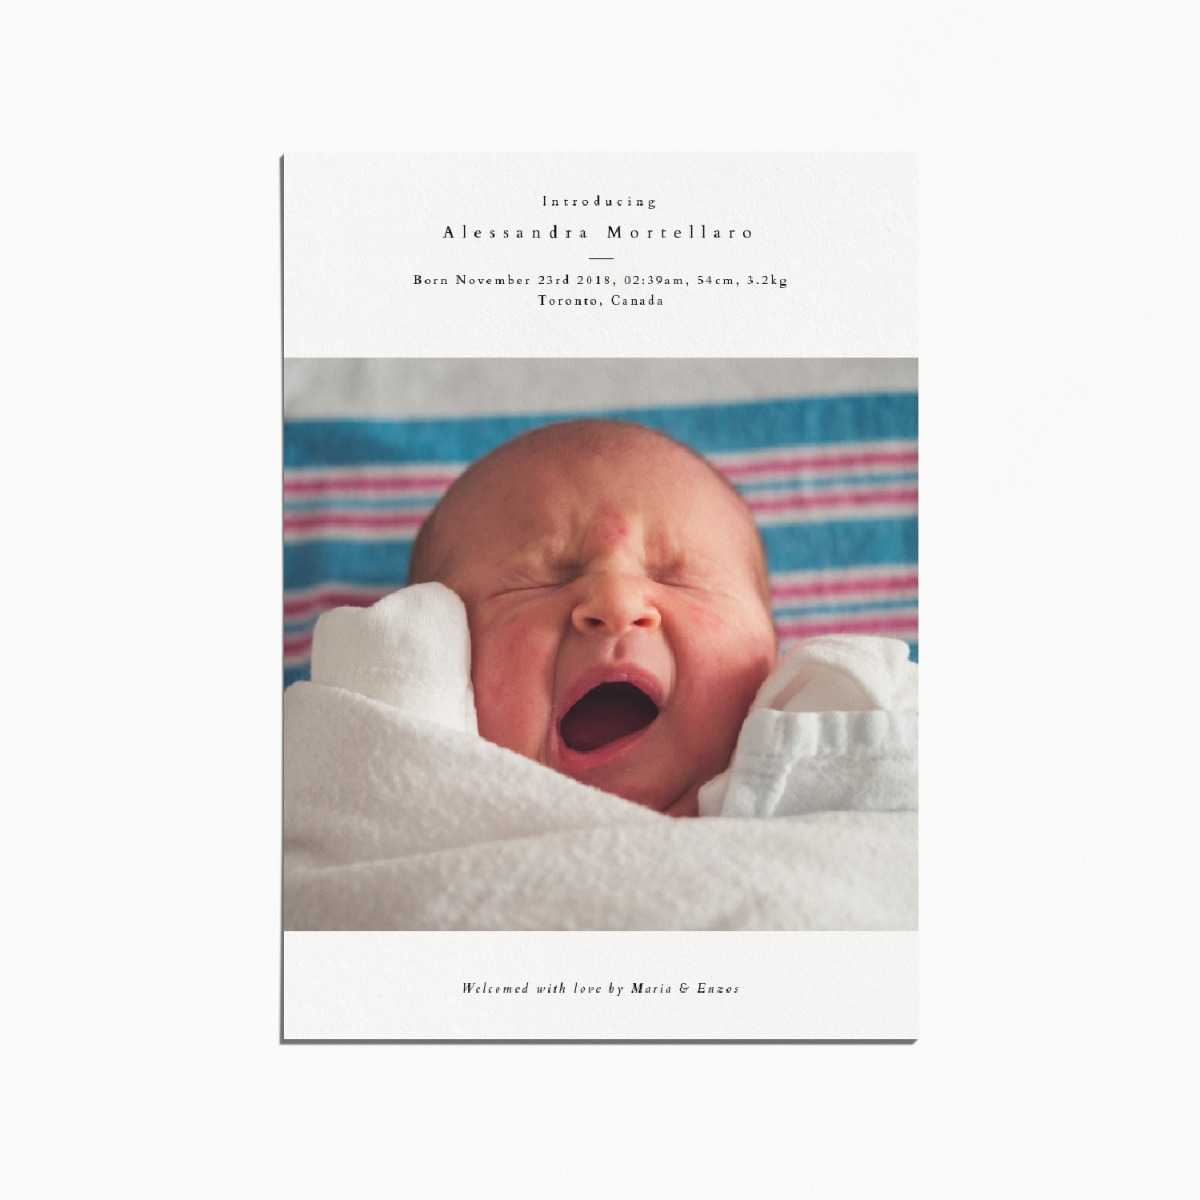 Birth announcement card with an image of a newborn baby yawning